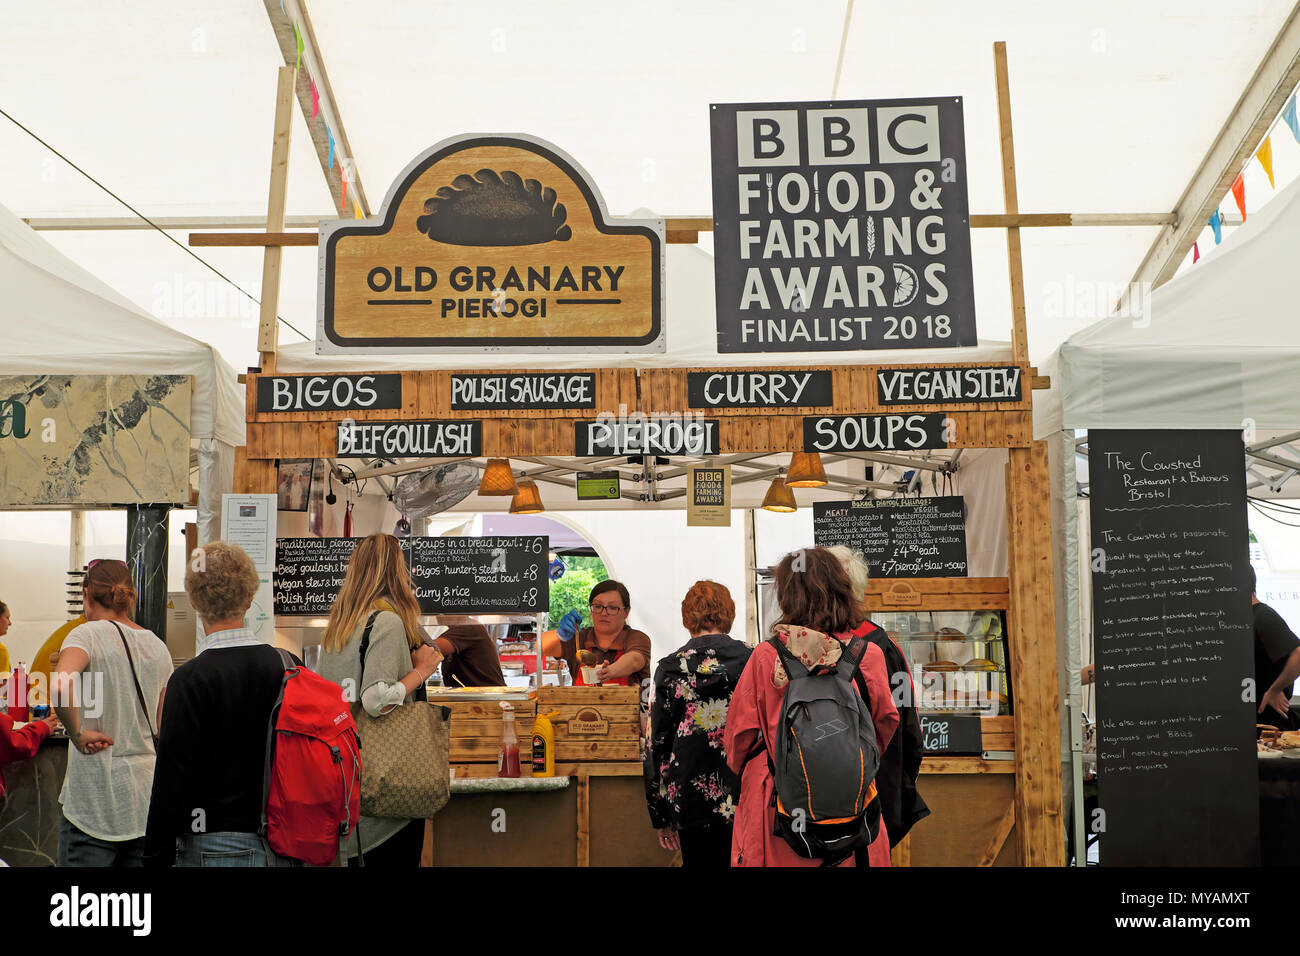 People buying food outside the Old Granary stall & BBC Food & Farming Awards sign at Hay Festival Food Hall marquee  Hay-on-Wye Wales UK  KATHY DEWITT Stock Photo